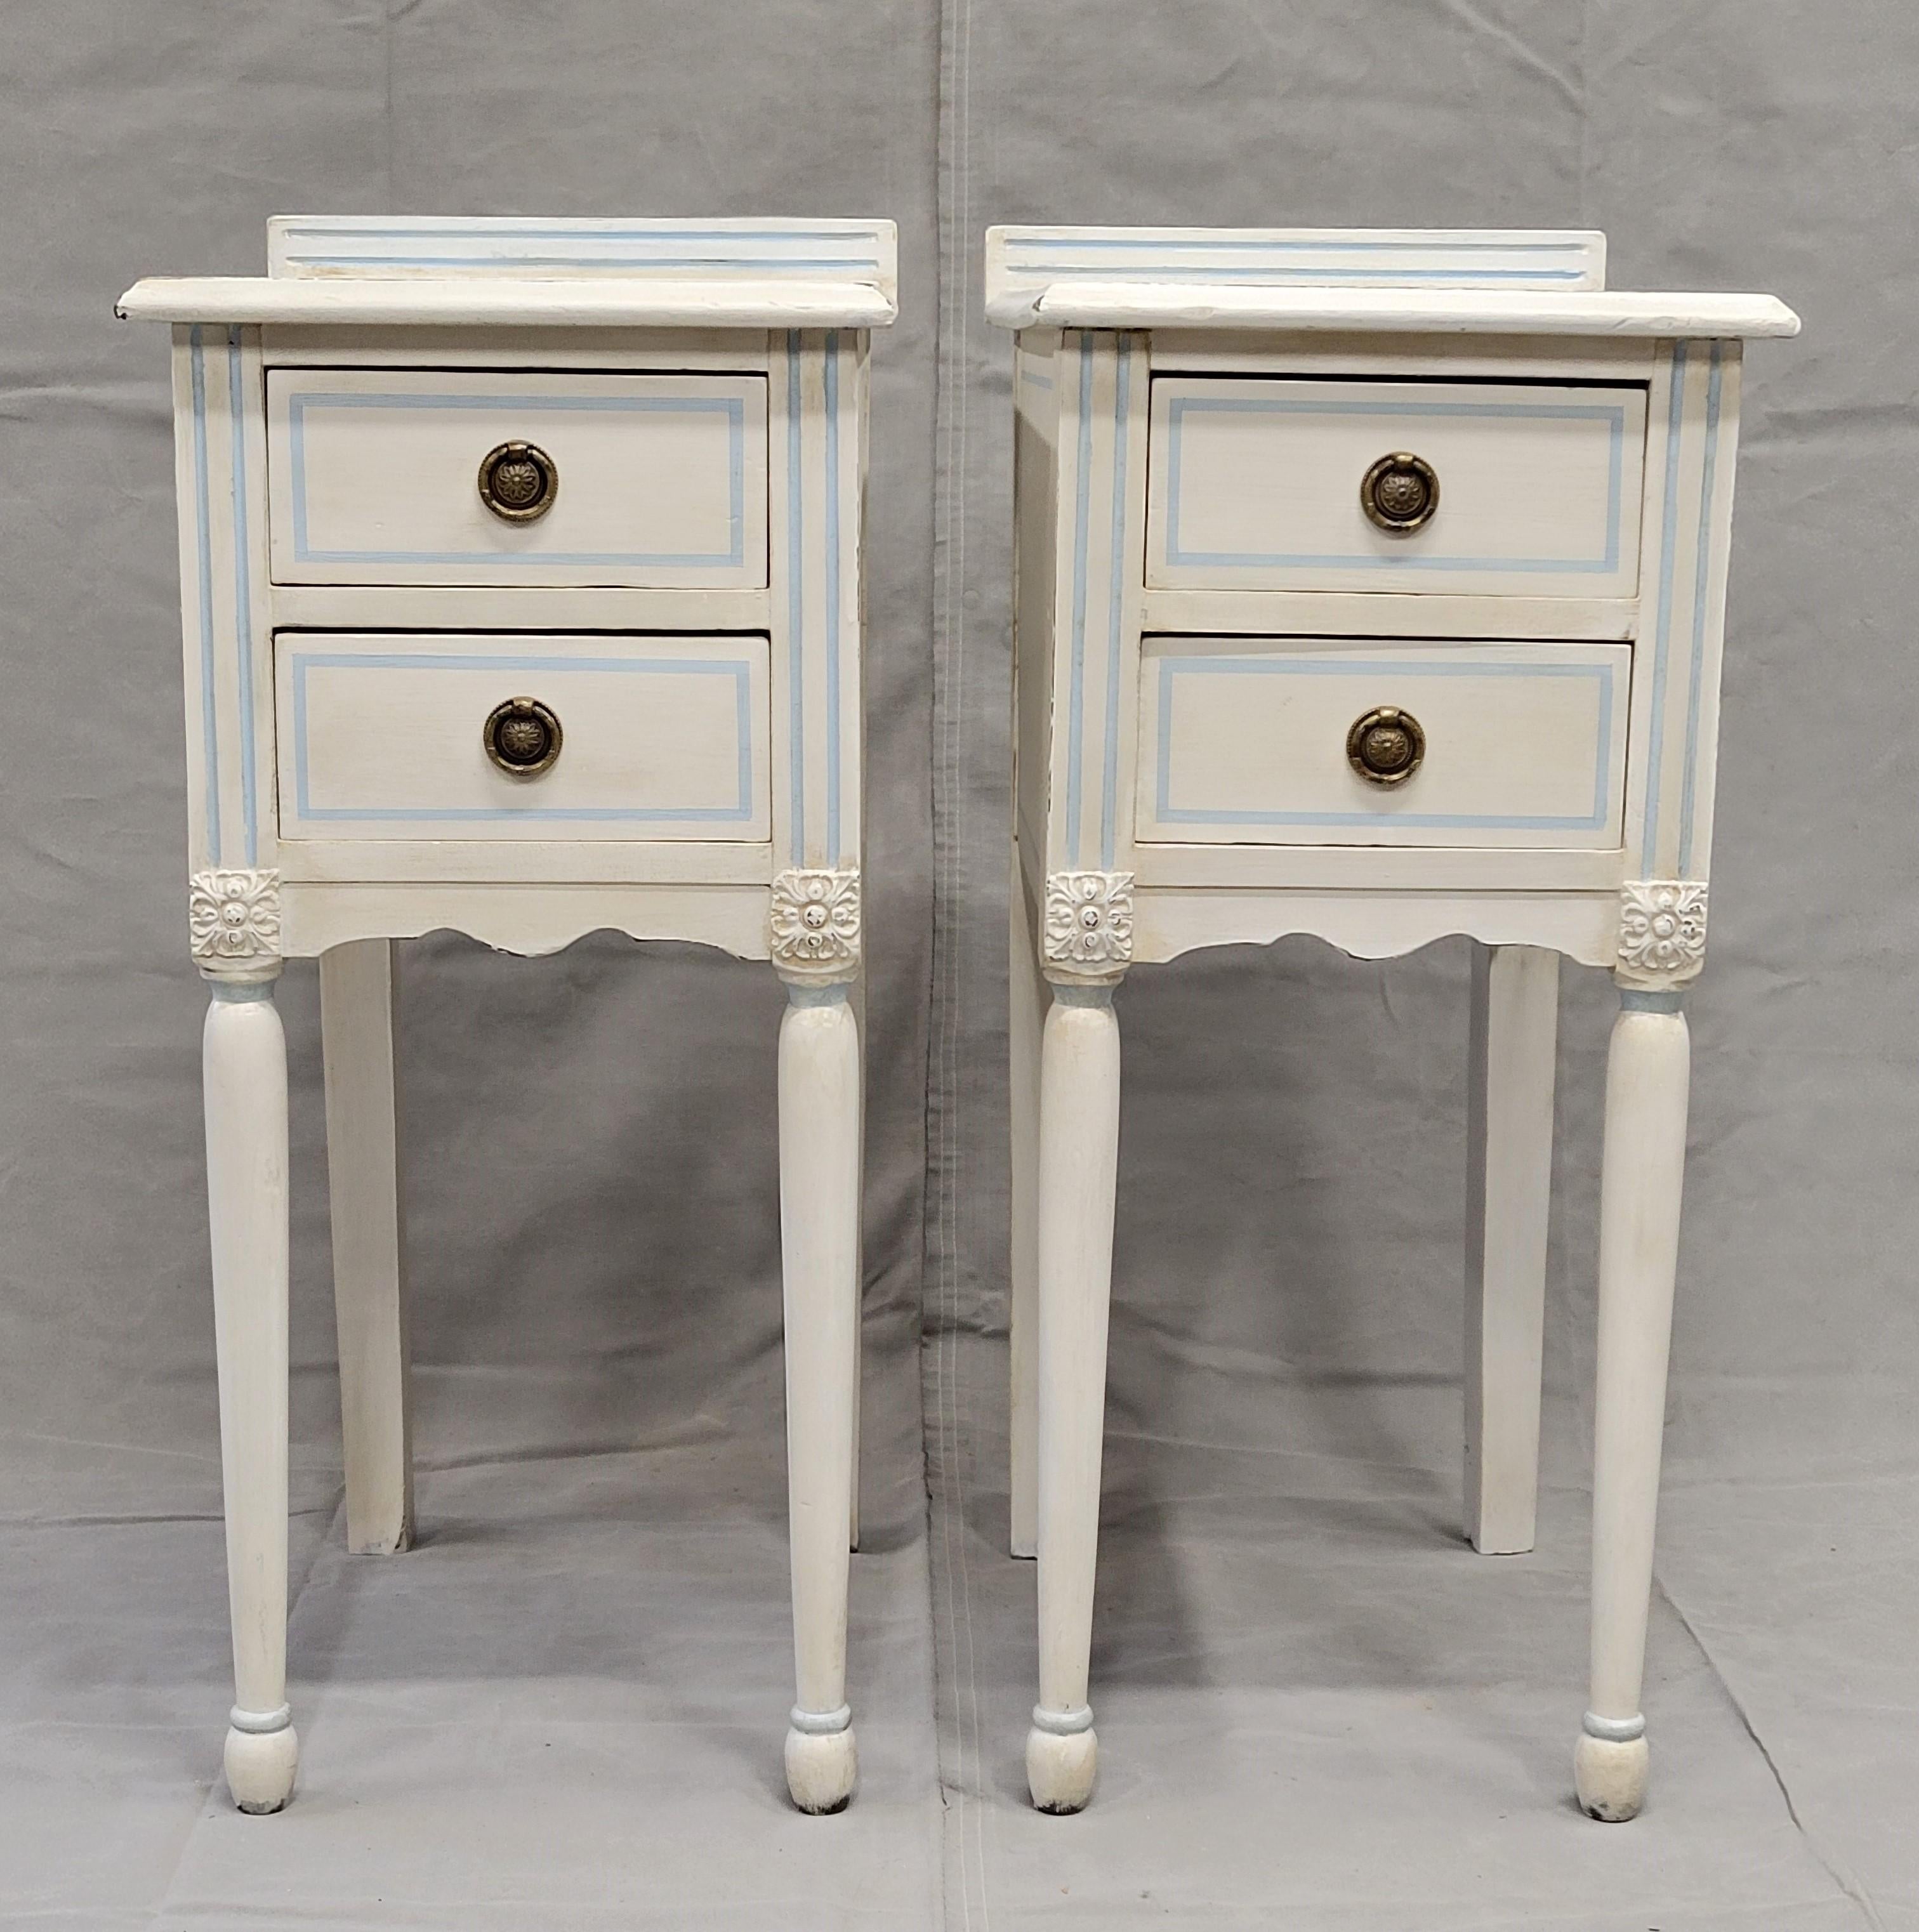 A beautiful pair of vintage nightstands painted white with pale blue pinstriping and brass pulls. Their narrow dimension makes them perfect for use in a smaller bedroom. Four drawers lined with wallpaper offer storage. The lightly distressed painted